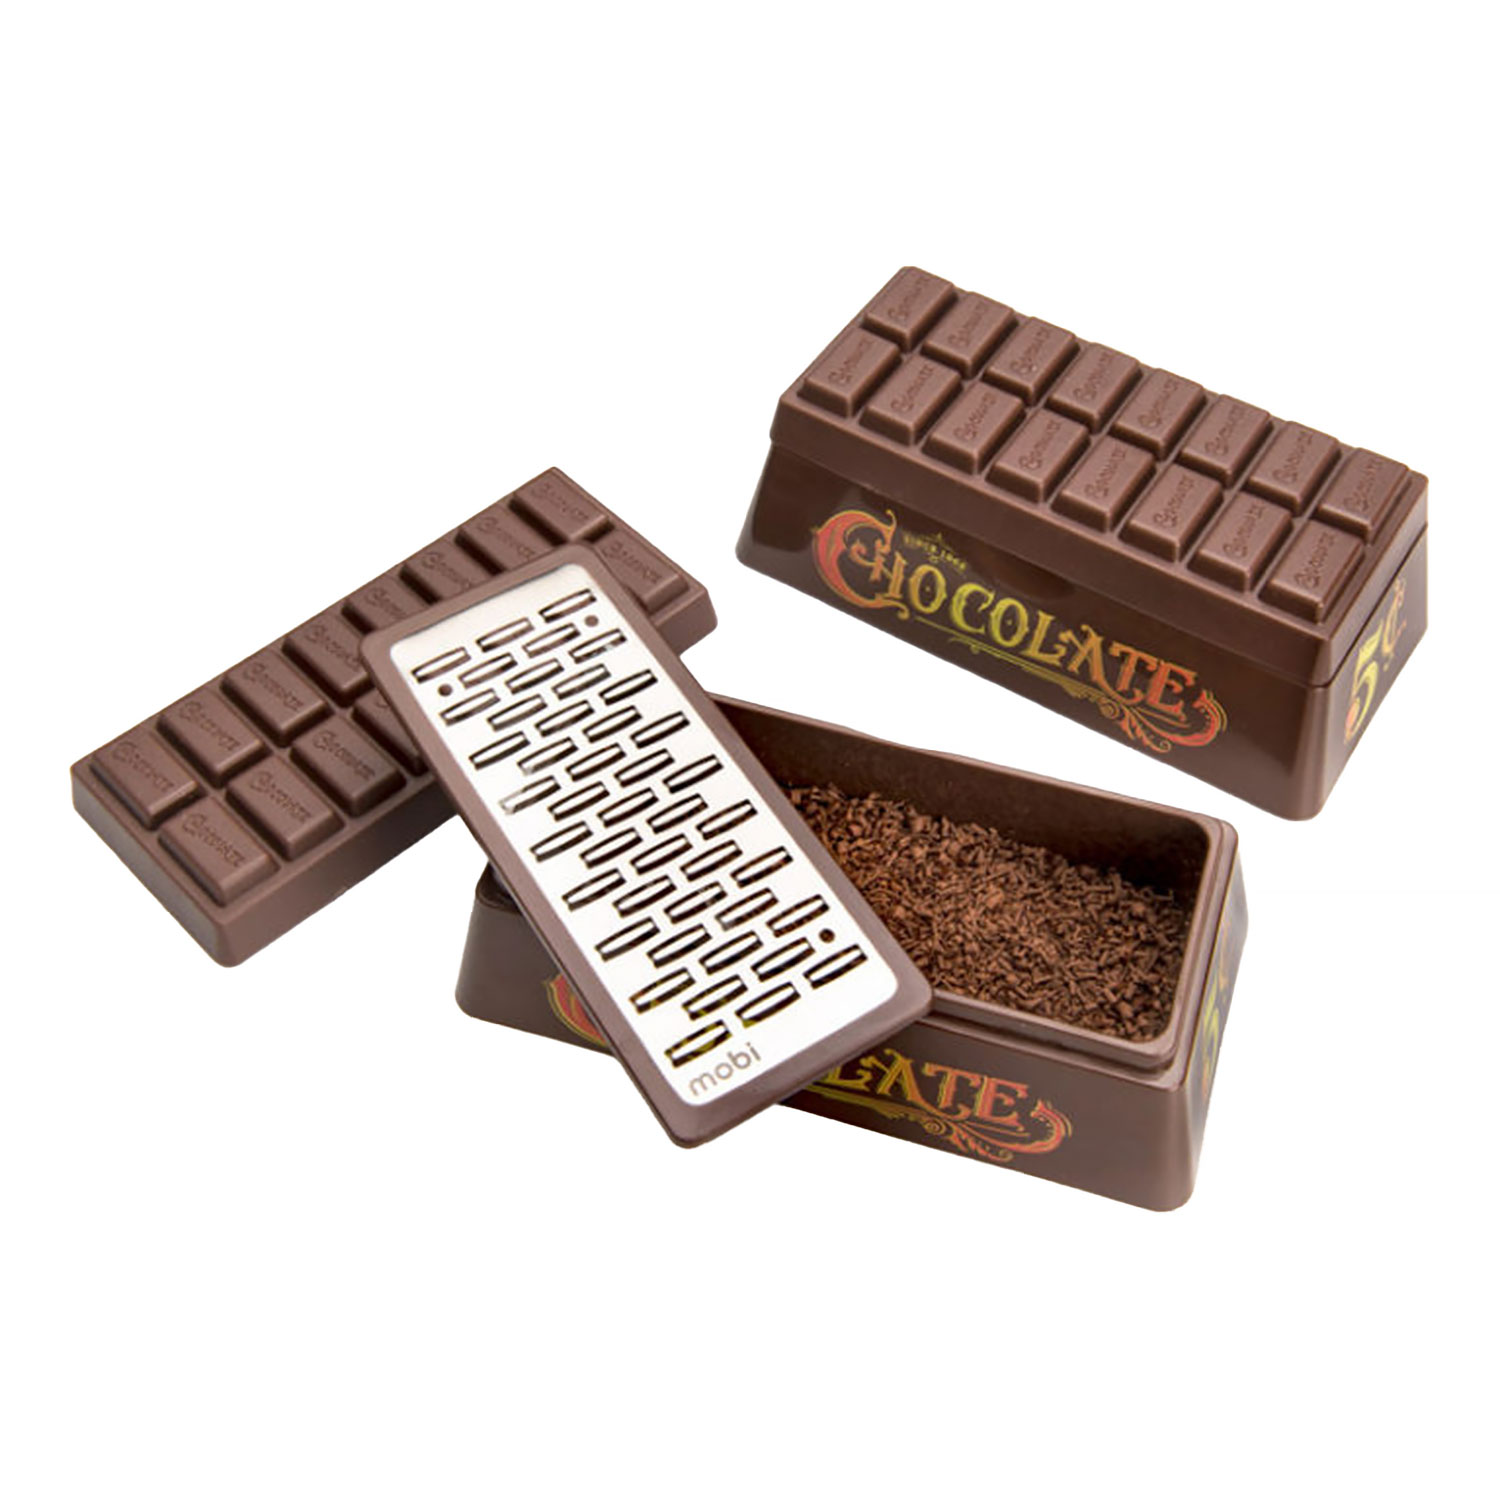 Grated chocolate and cube of bitter chocolate with a mini grater